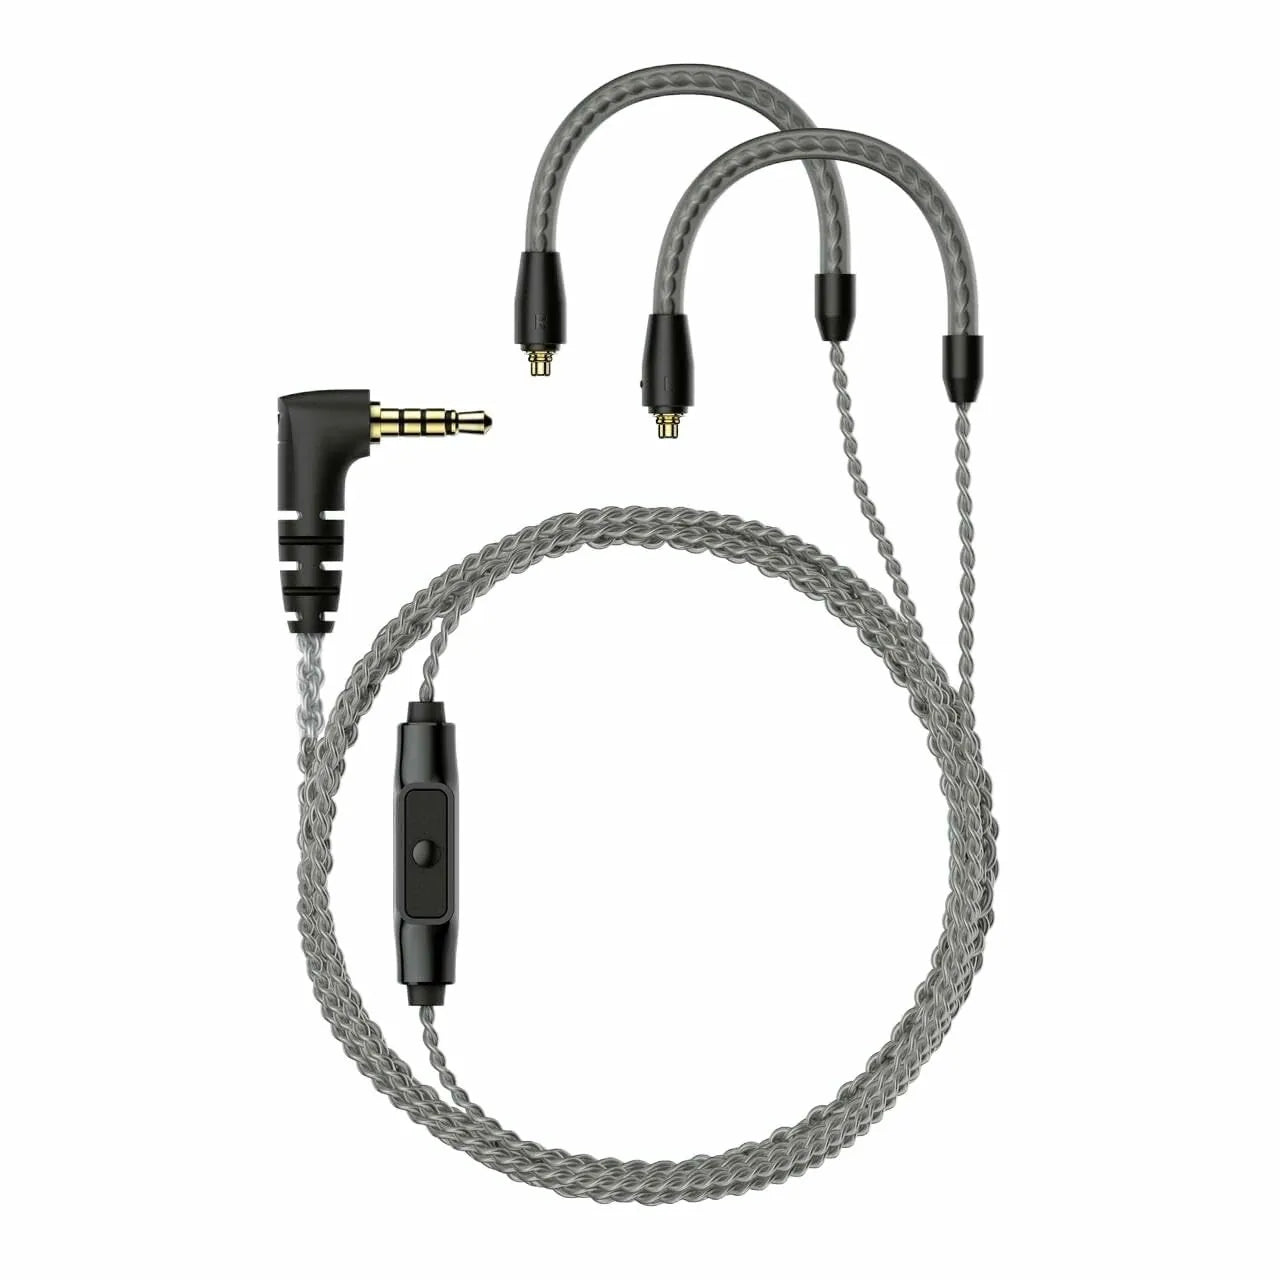 Sennheiser MMCX Cable with Microphone for IE200 IE300 IE600 IE900 Earphone for 3.5mm Plug